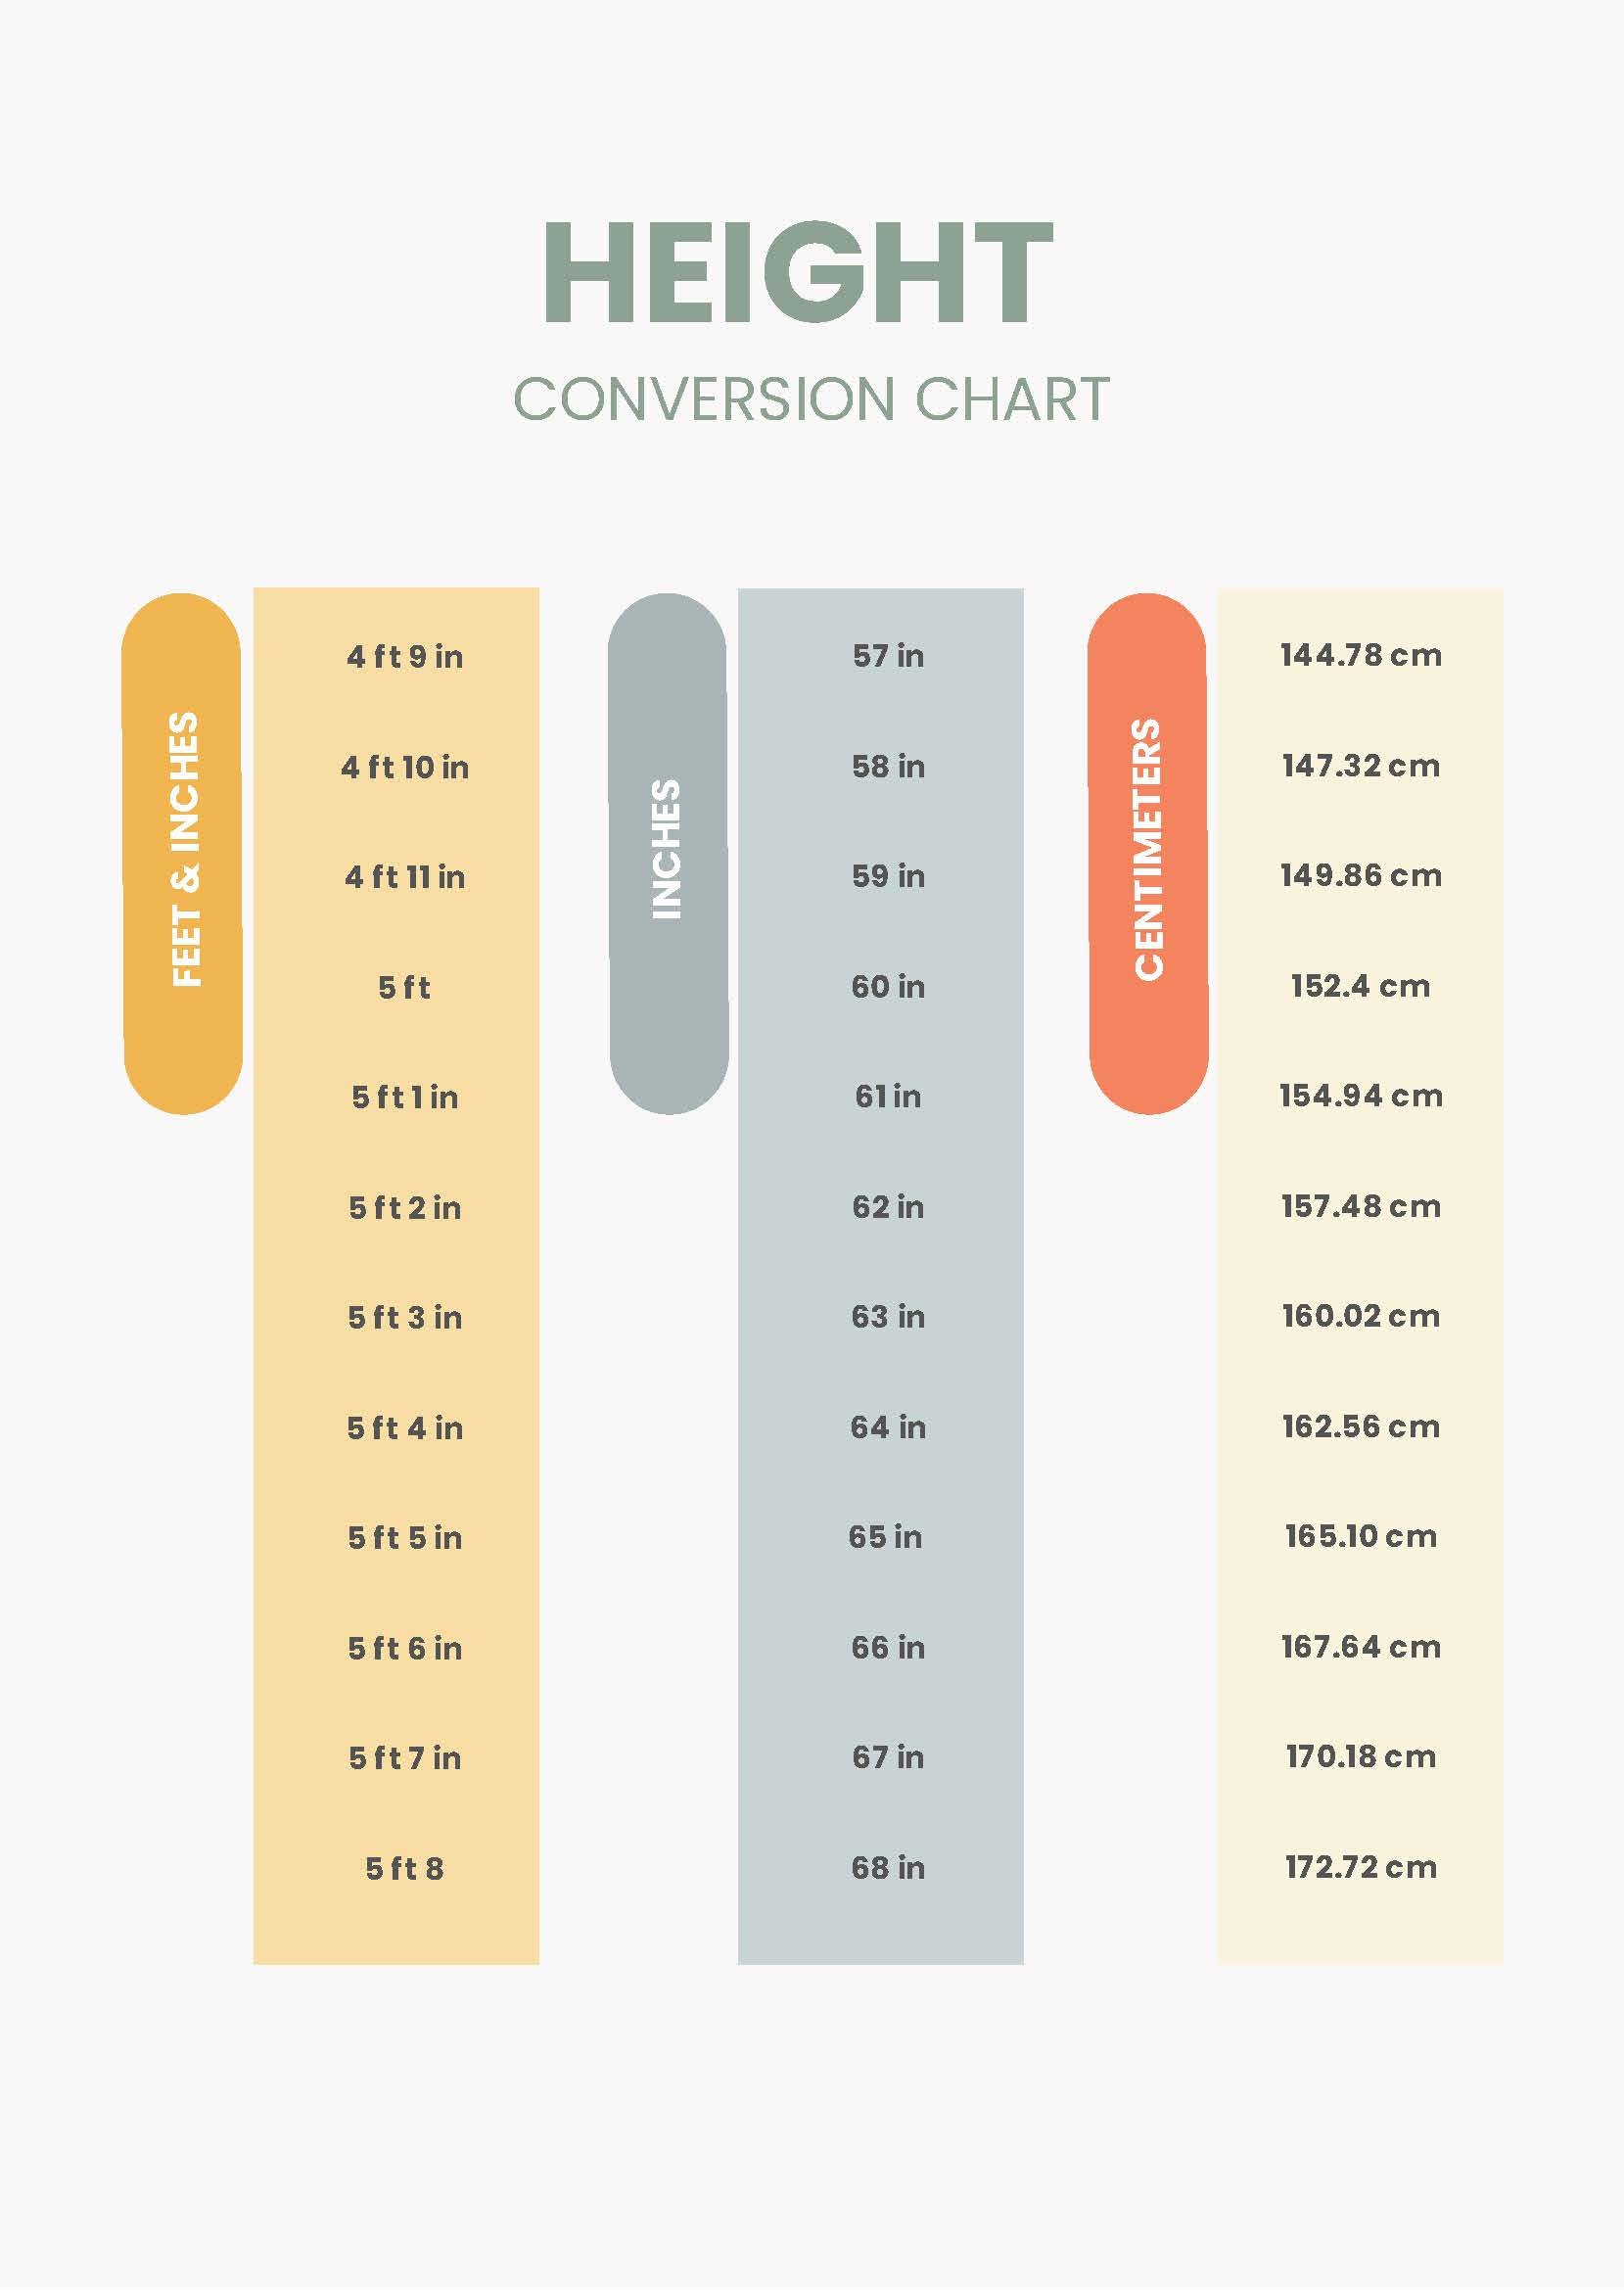 FREE Height Conversion Chart Template Download in PDF, Illustrator